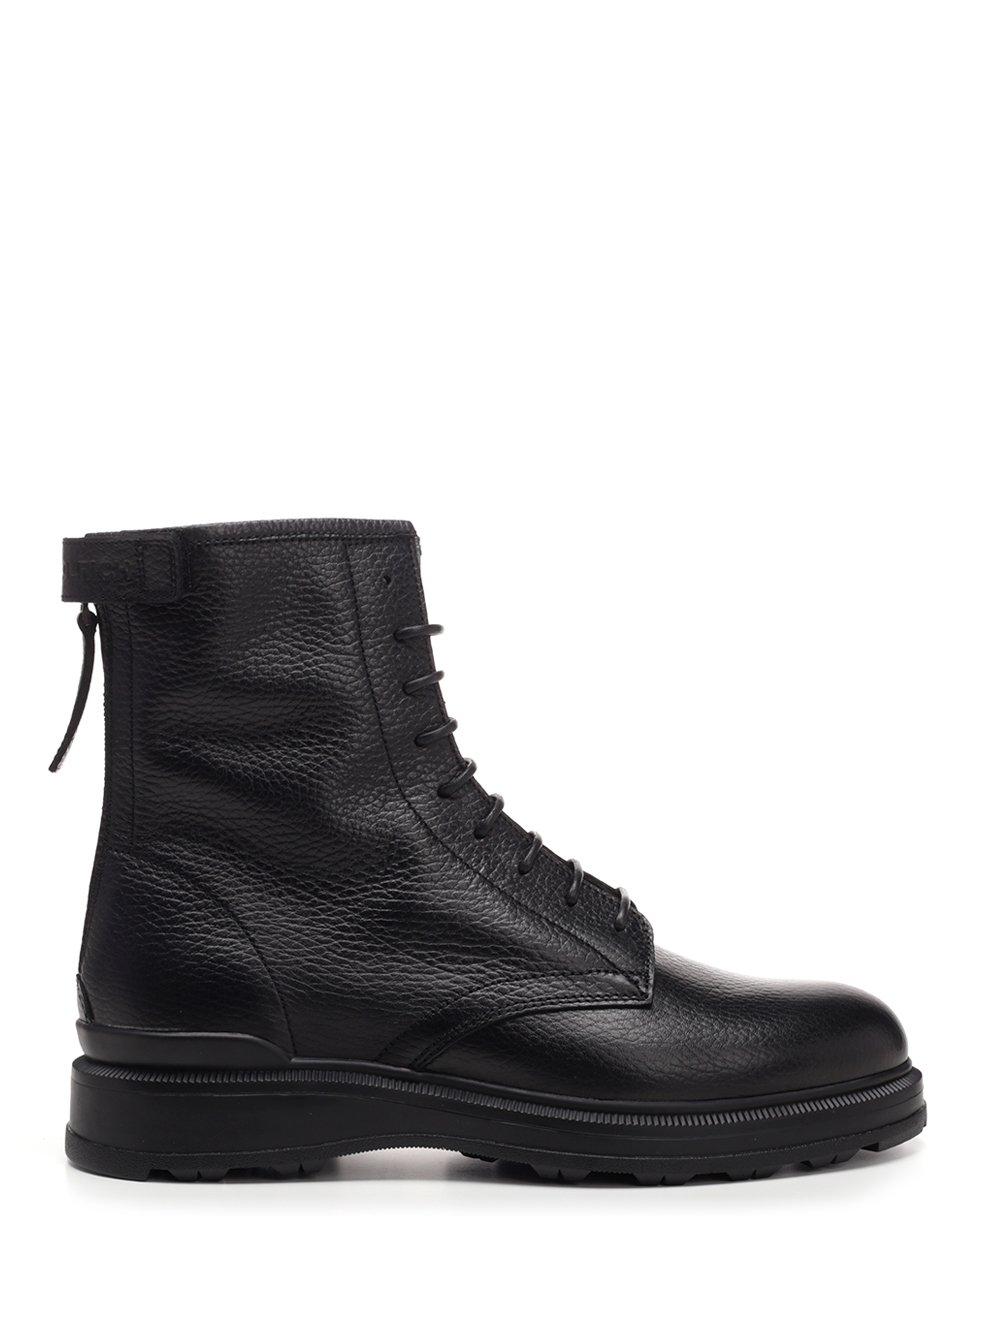 Woolrich Rubber Zip-up Combat Boots in Black - Lyst